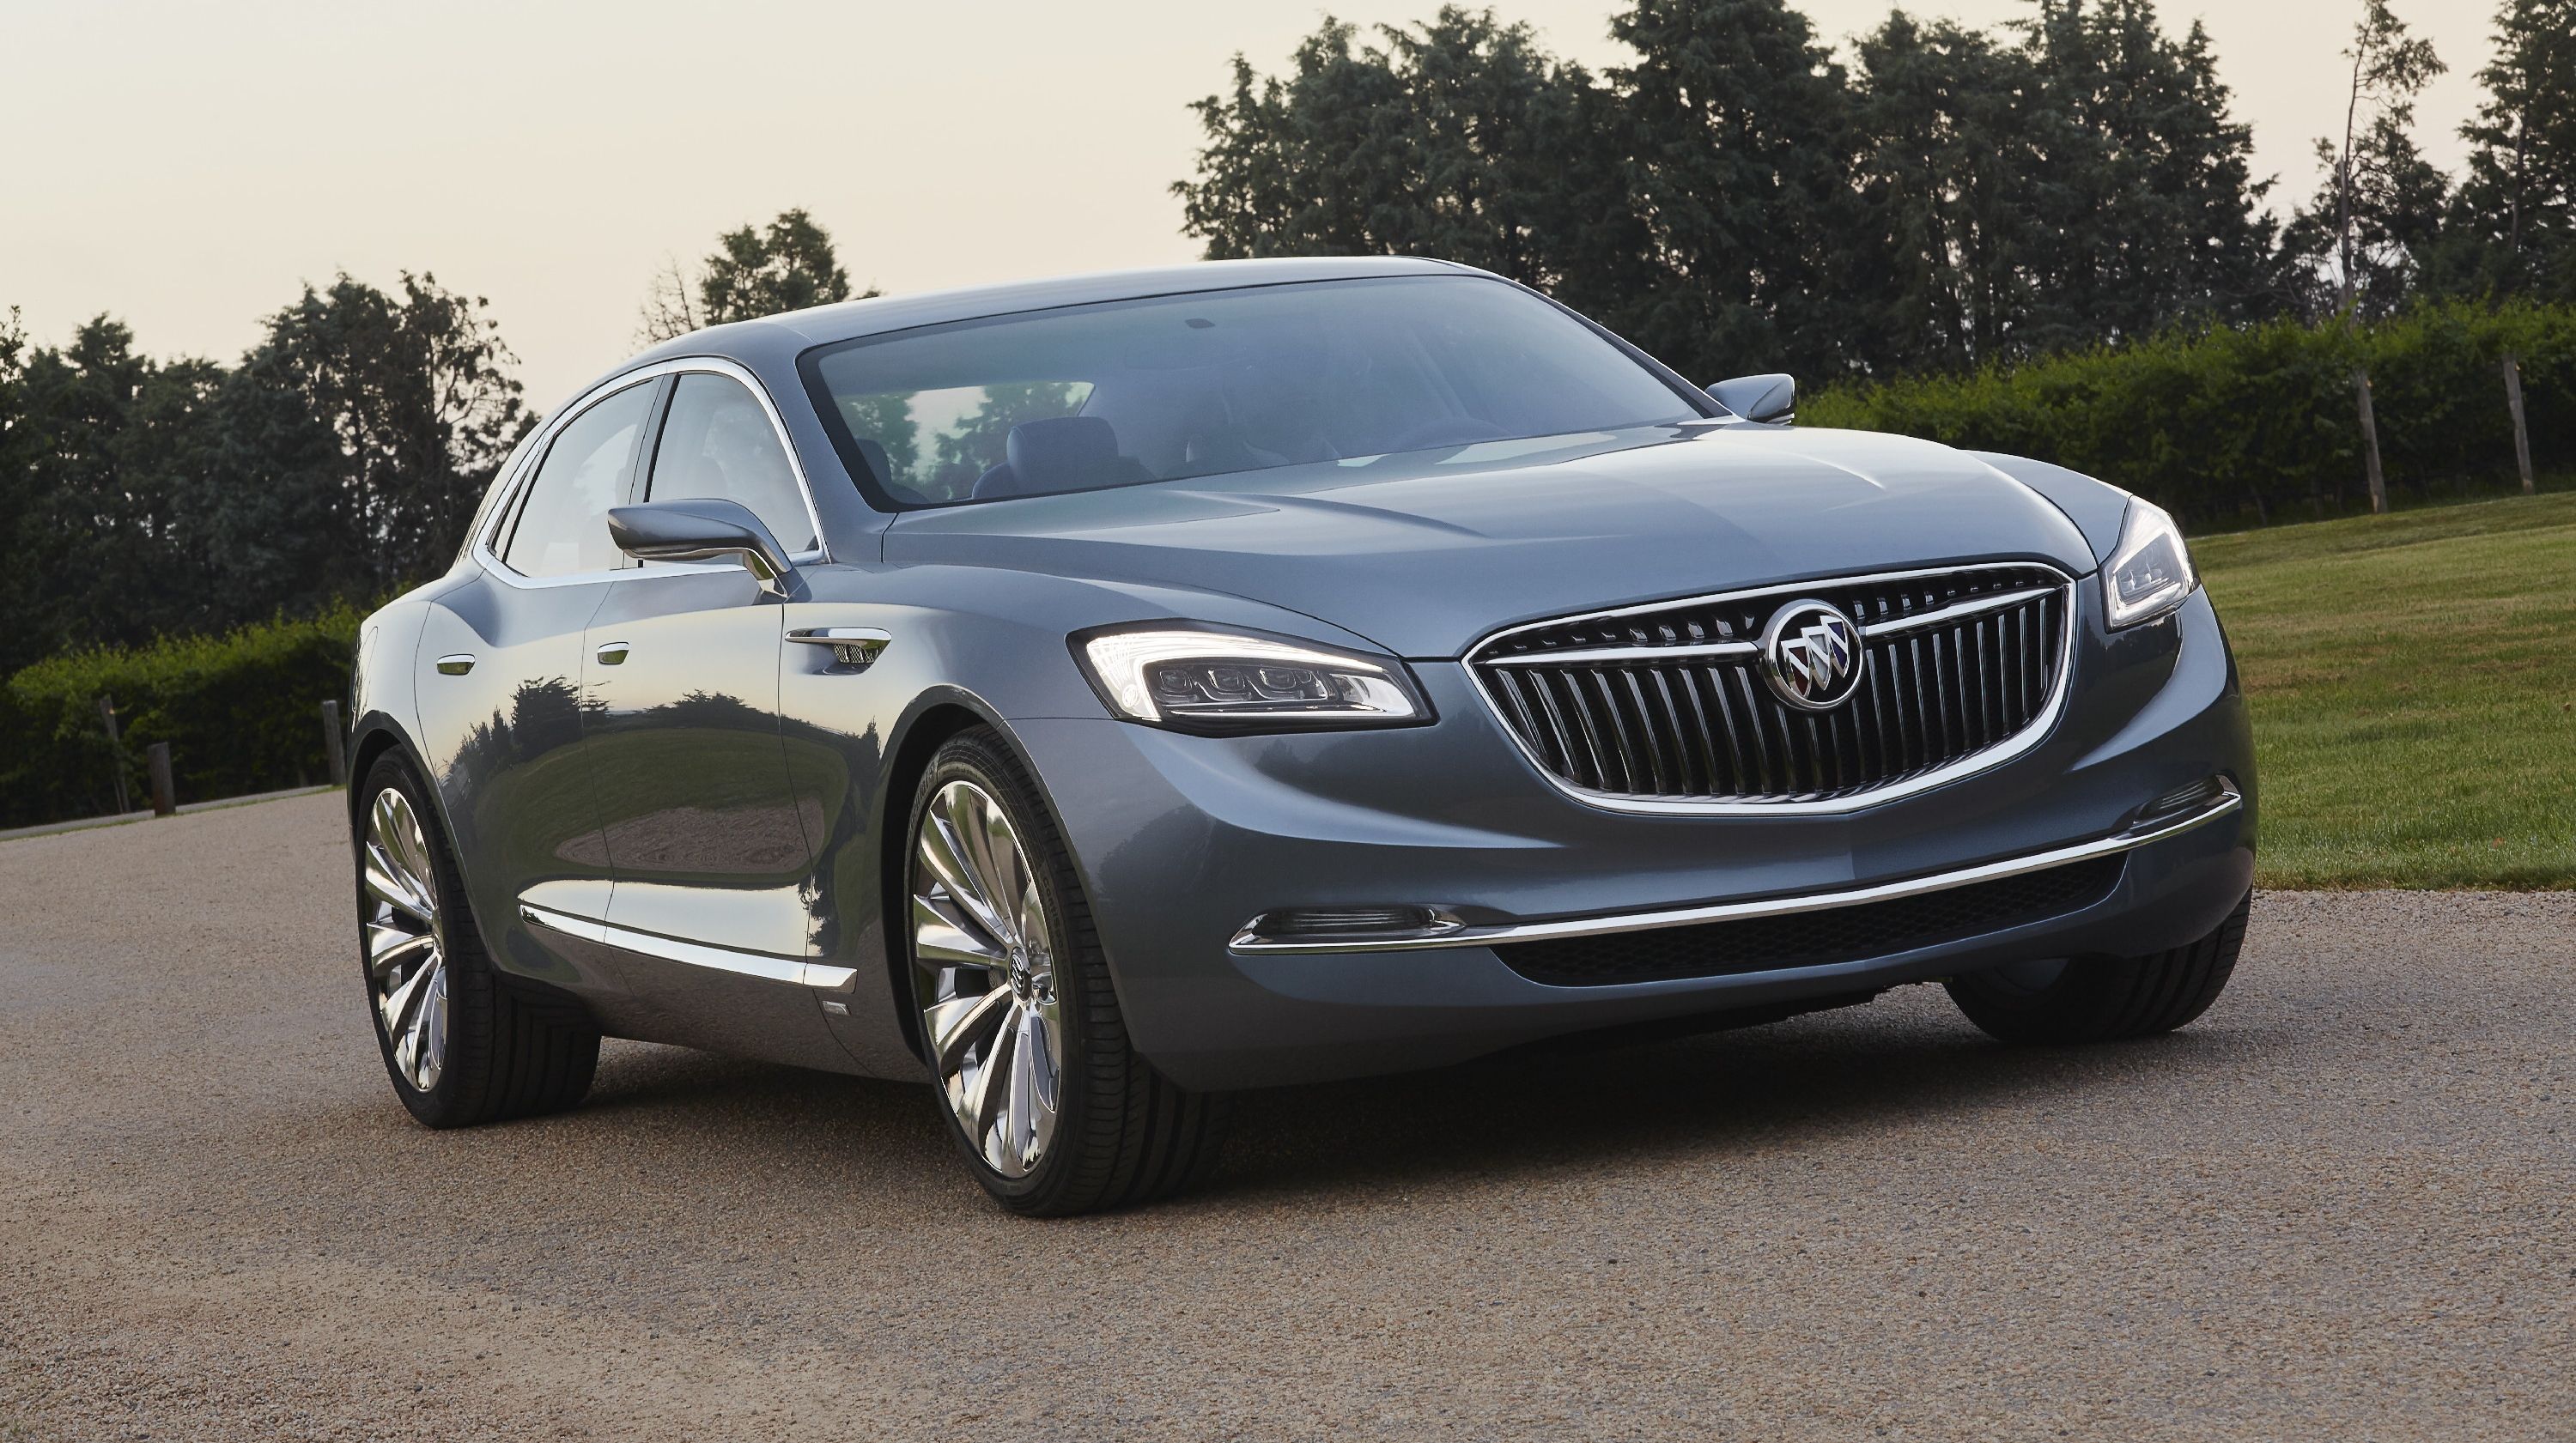  Buick definitely needs a new flaghip to push into the actual luxury realm, and the Avenir Concept could be the inspration for such a vehicle. 